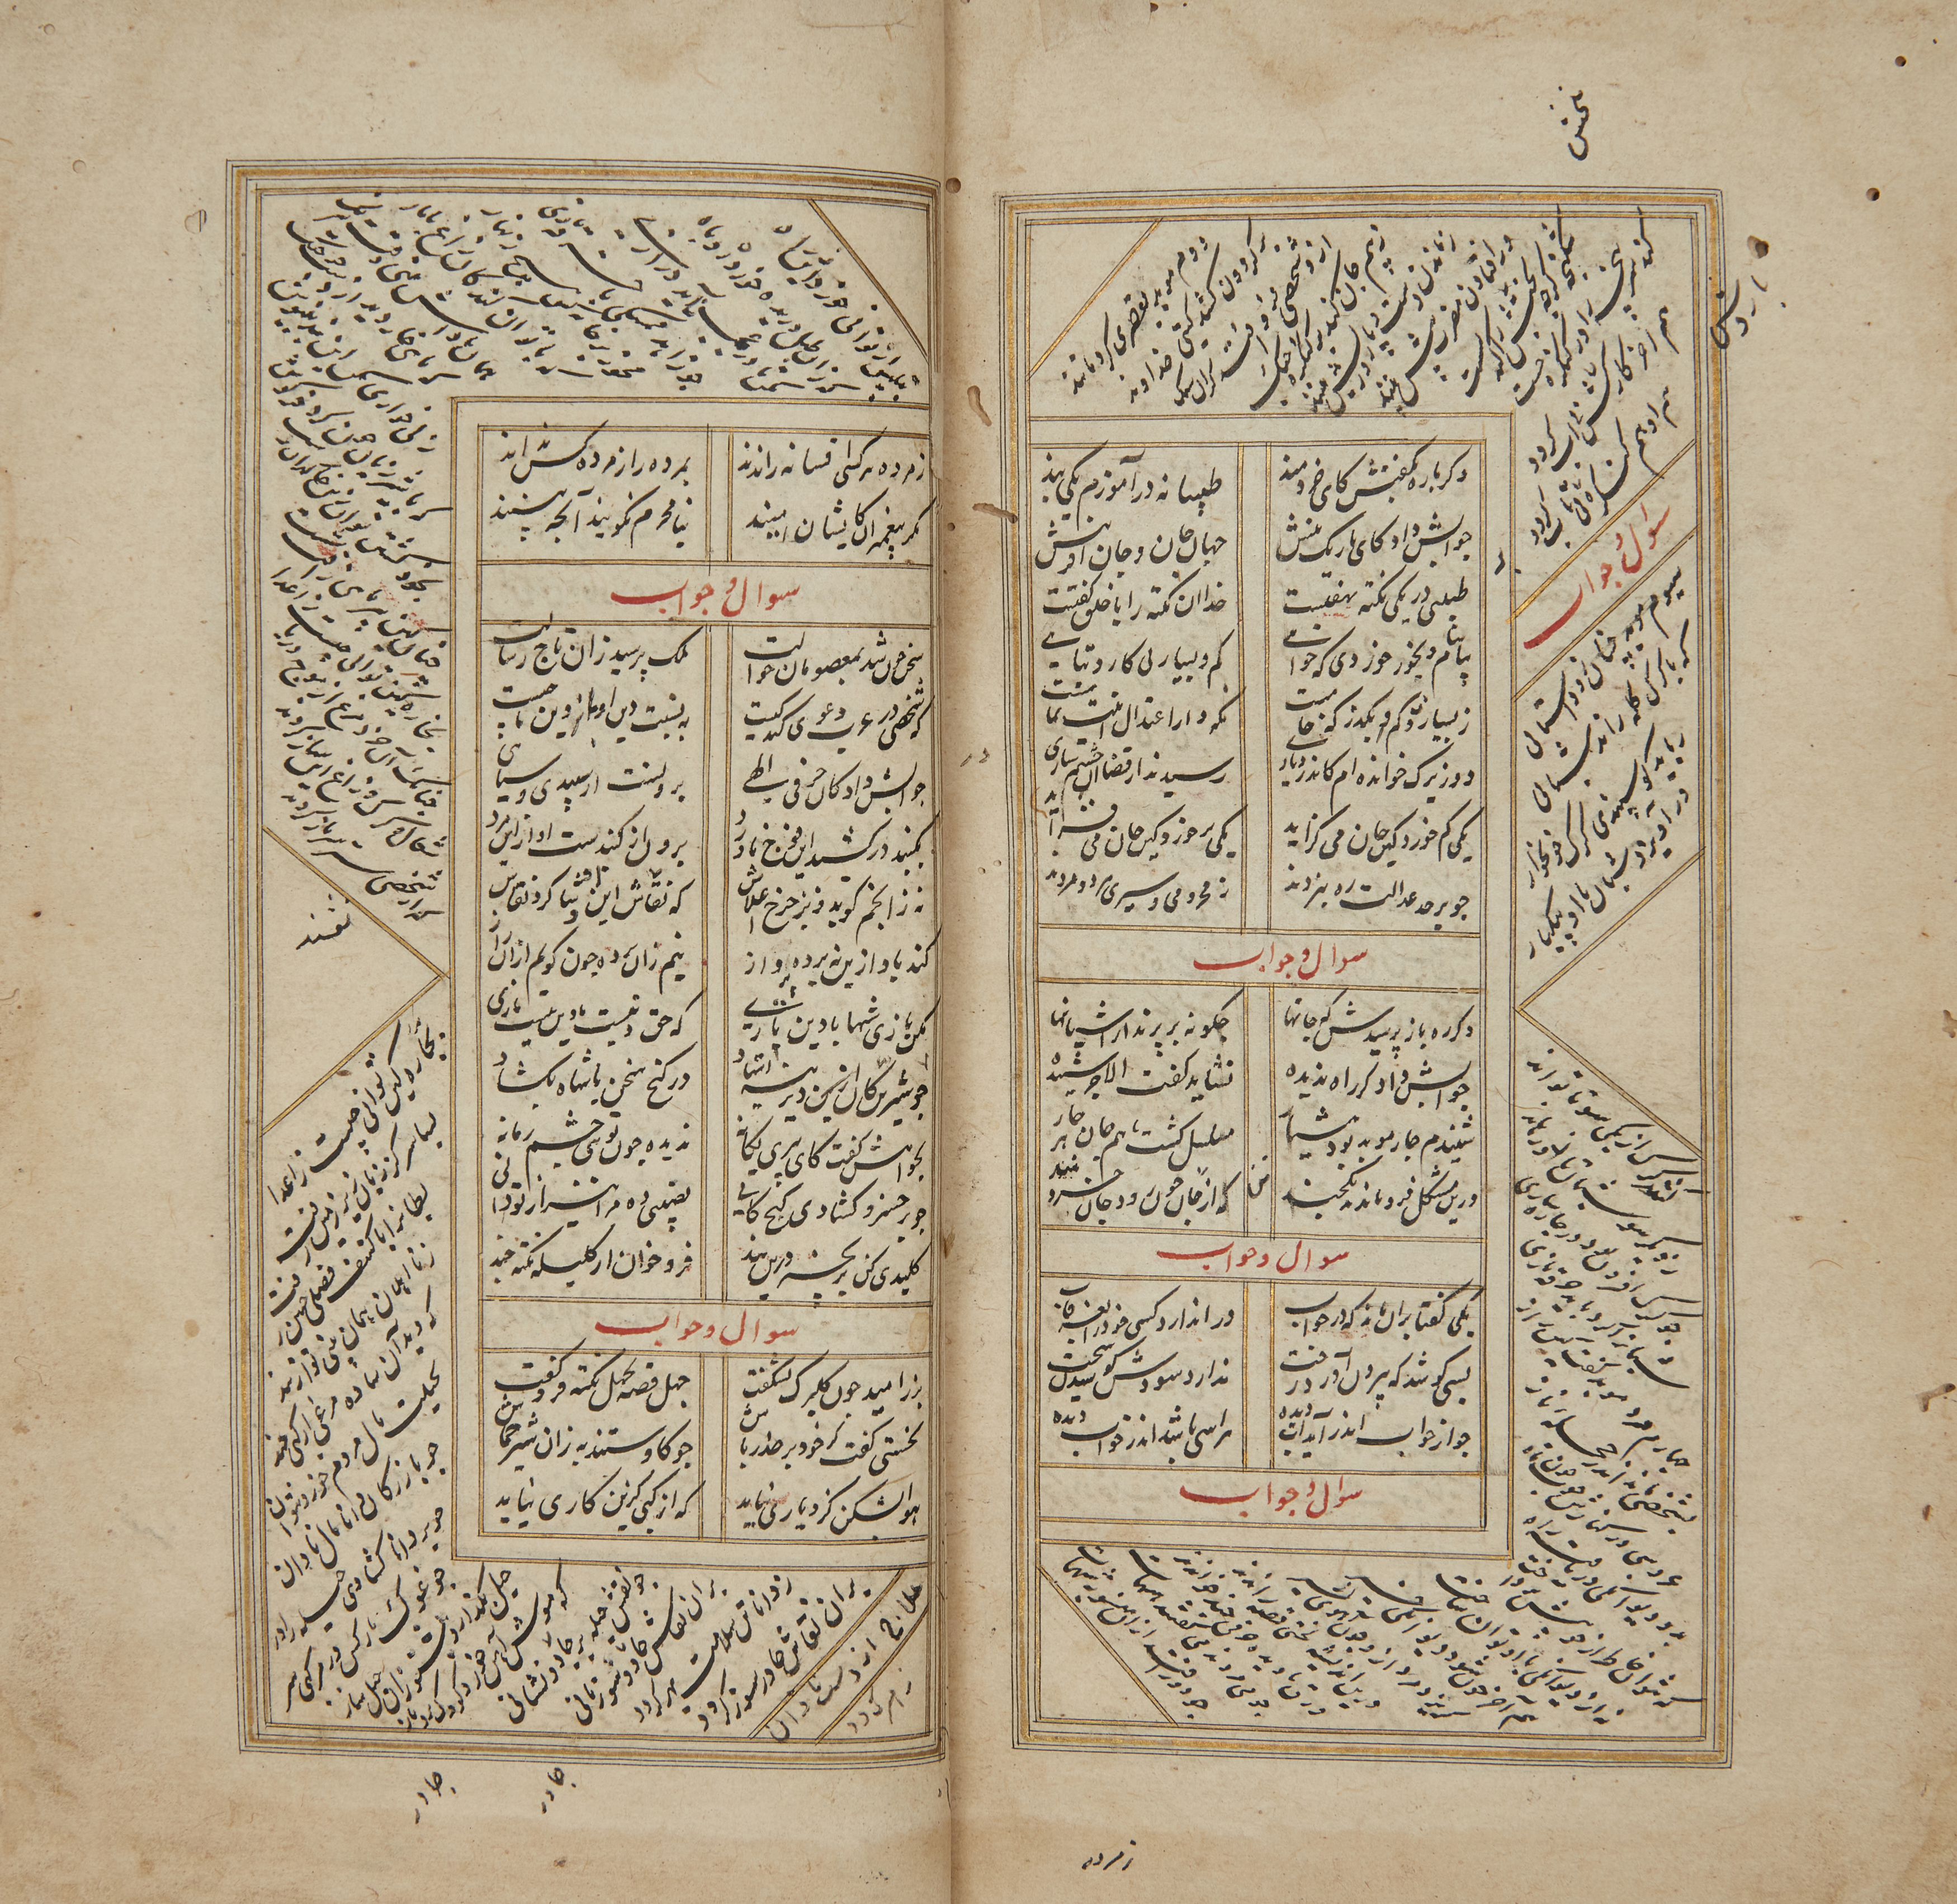 A collection of Persian verses,Safavid Iran, late 17th-early 18th centuryPersian manuscript on pa... - Image 3 of 4